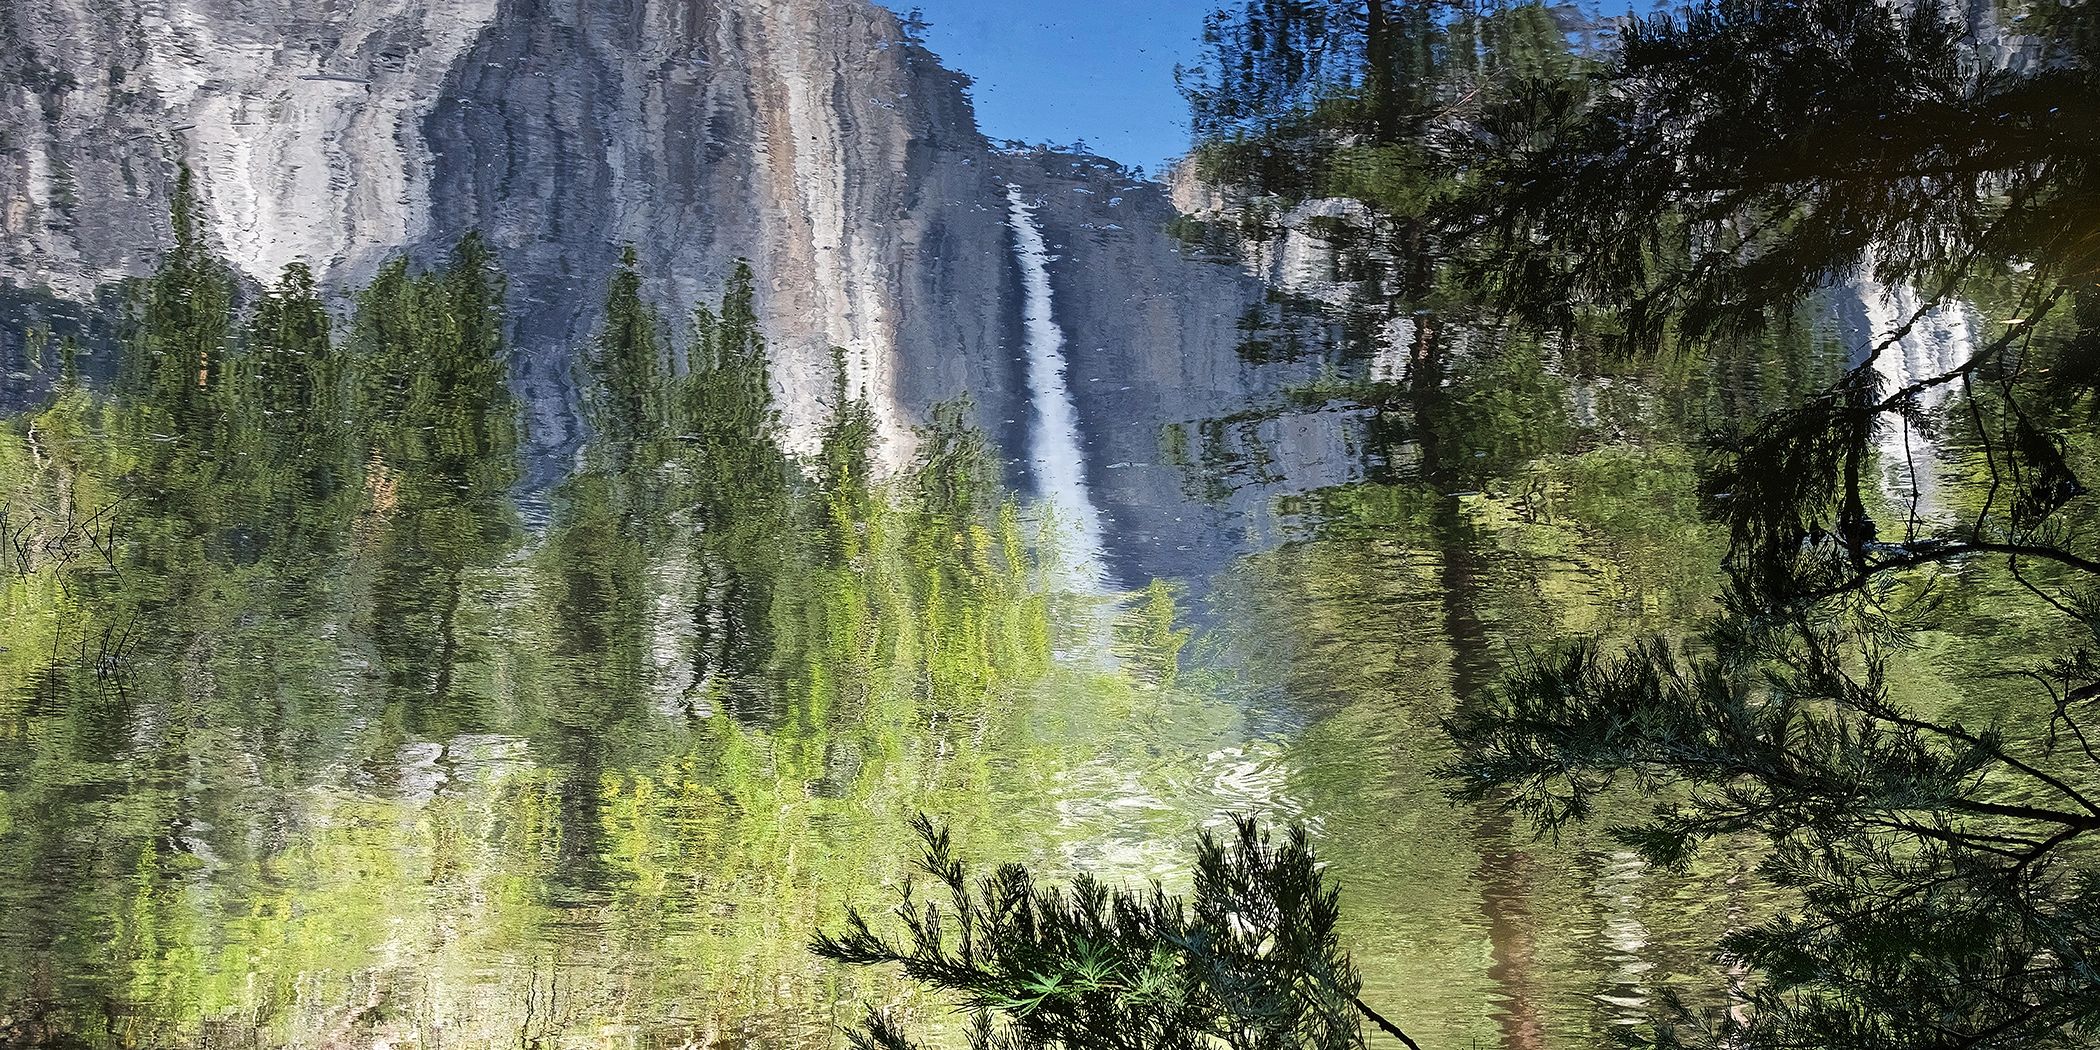 Reflection of Yosemite Upper Falls in the River, with tree branches between the reflection & camera 